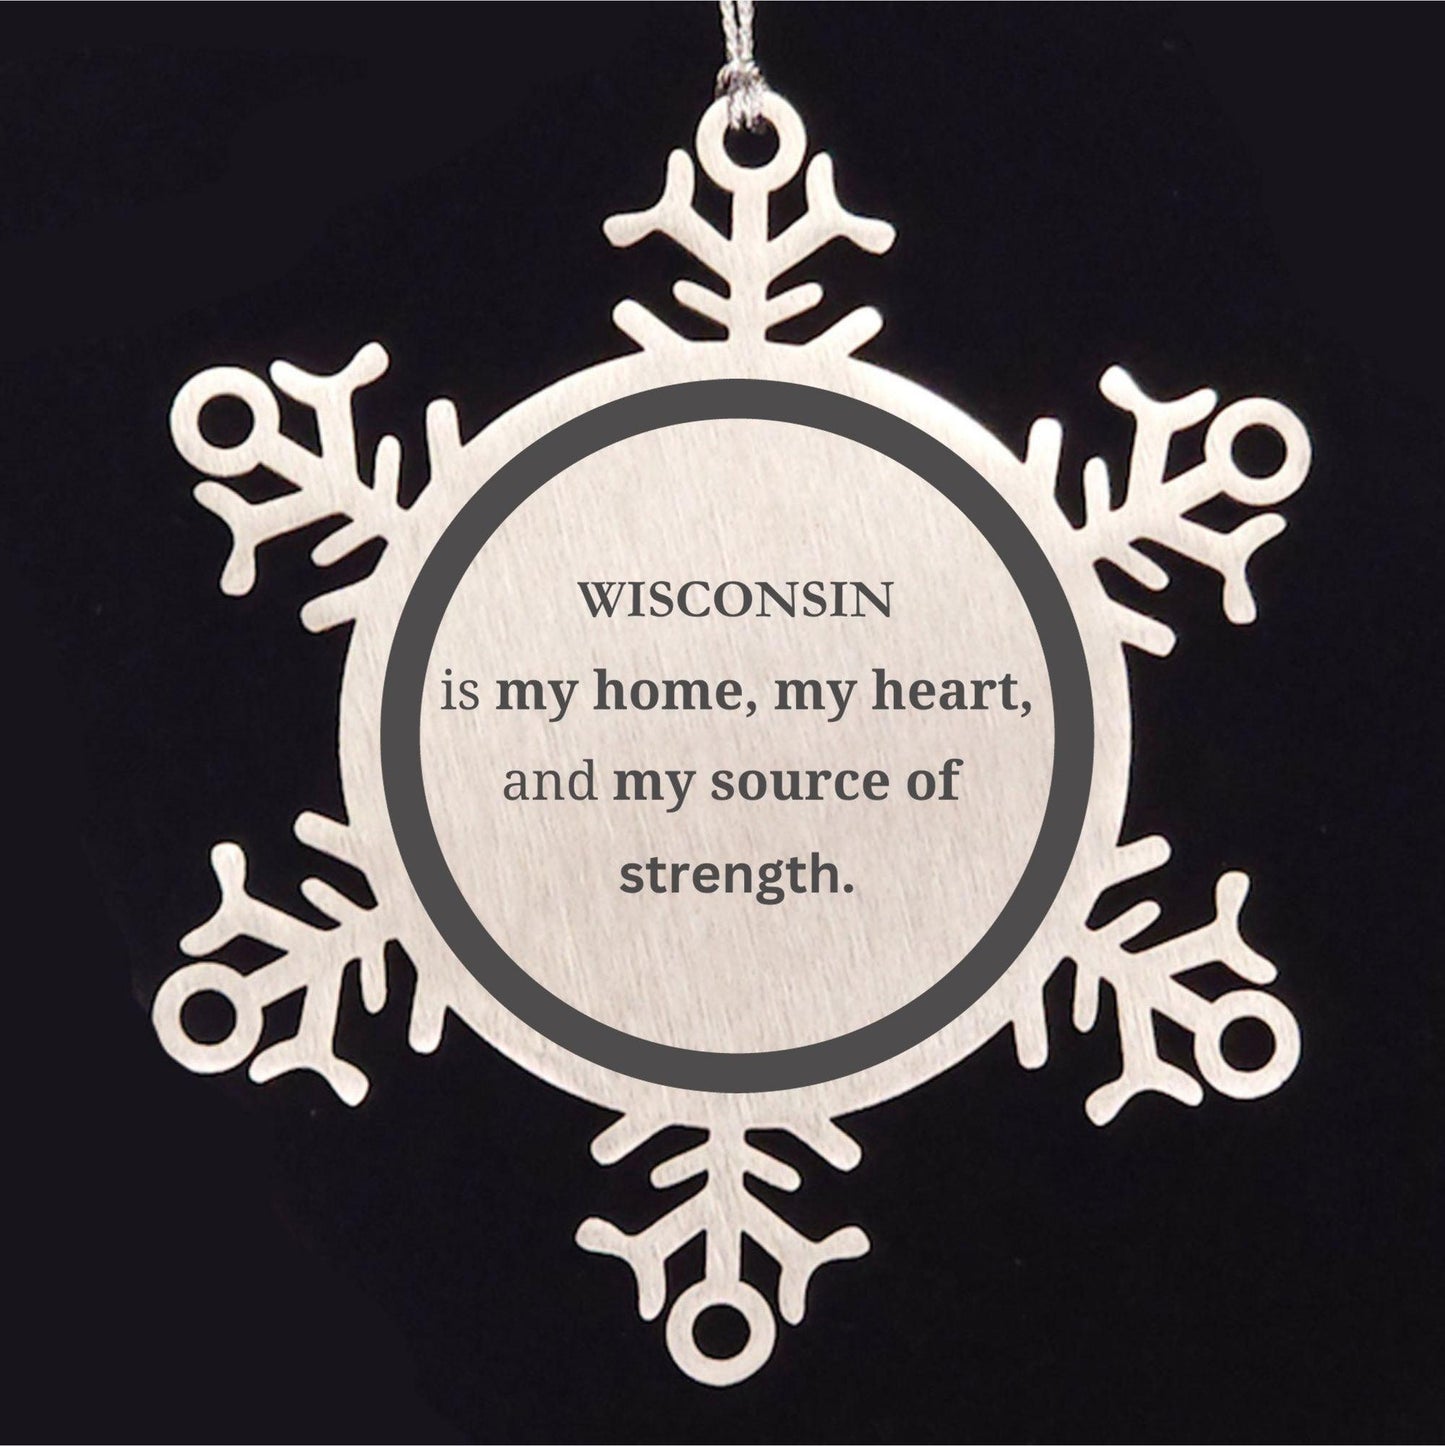 Wisconsin is my home Gifts, Lovely Wisconsin Birthday Christmas Snowflake Ornament For People from Wisconsin, Men, Women, Friends - Mallard Moon Gift Shop